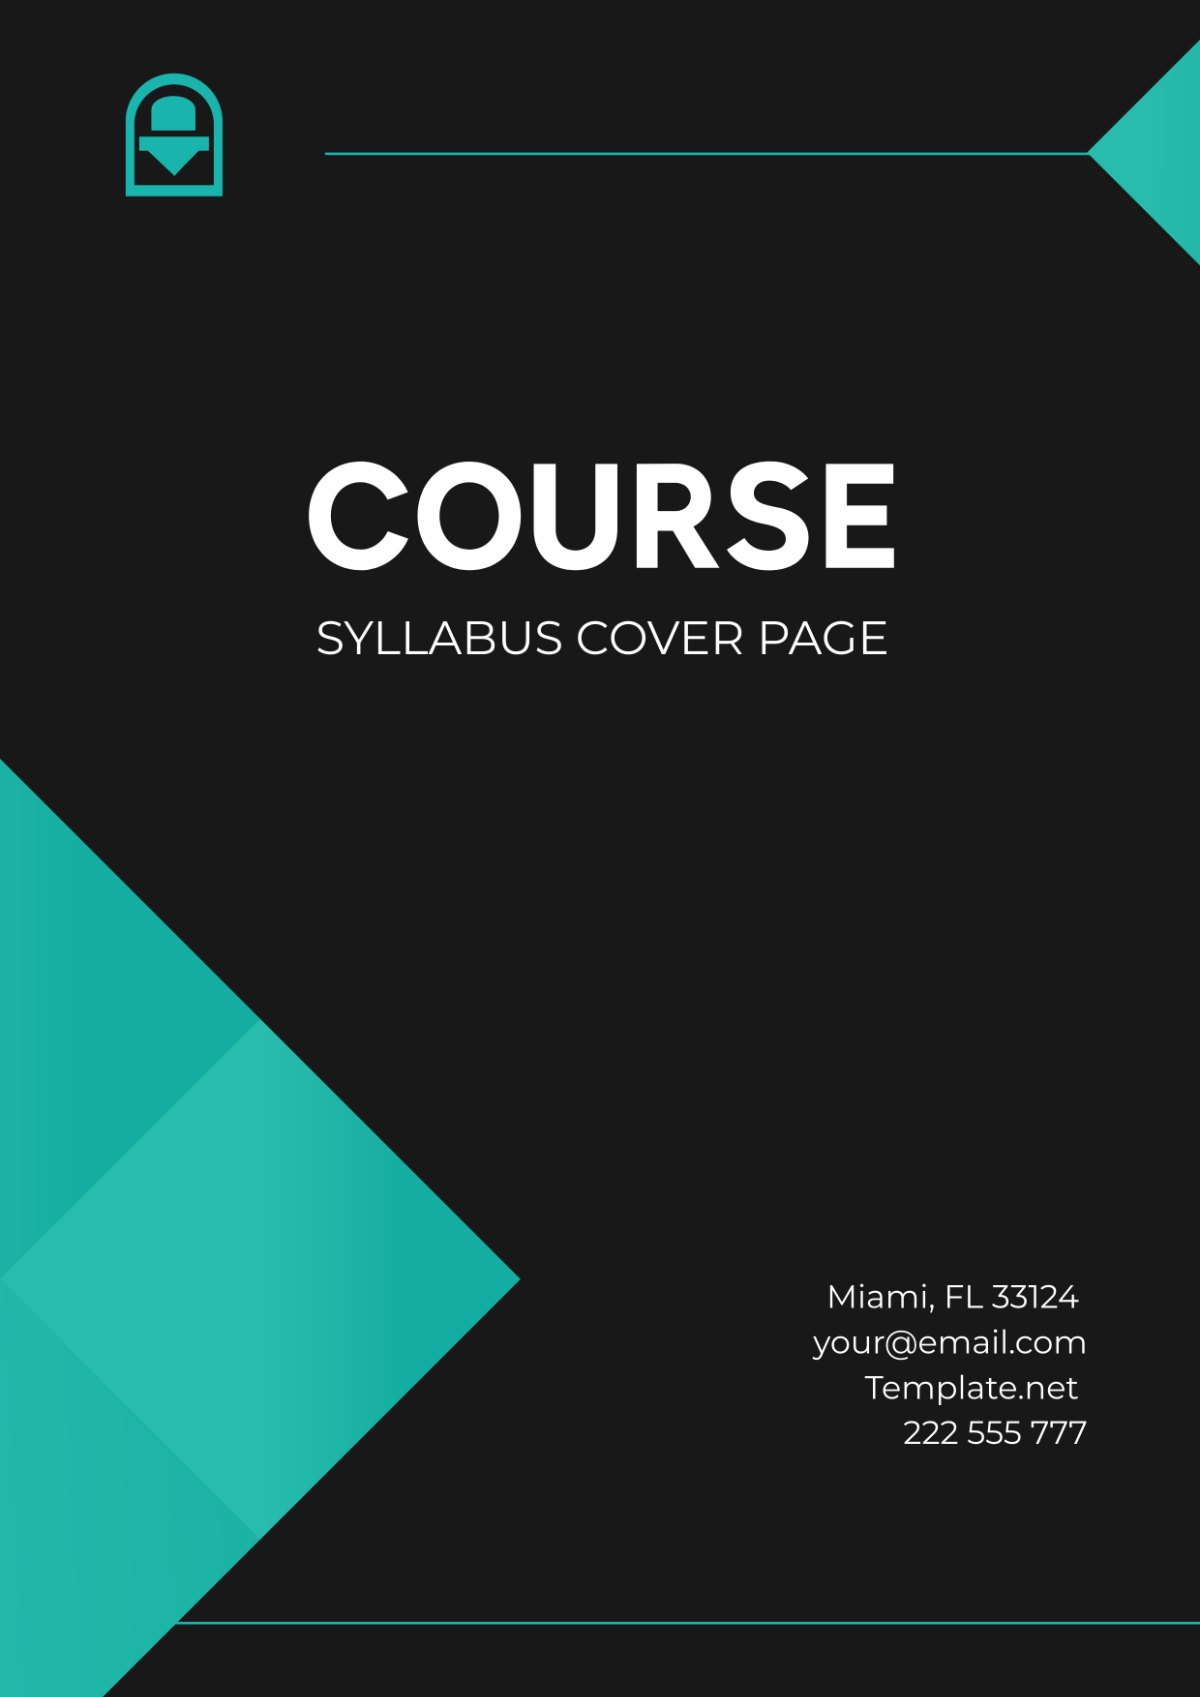 Course Syllabus Cover Page Template